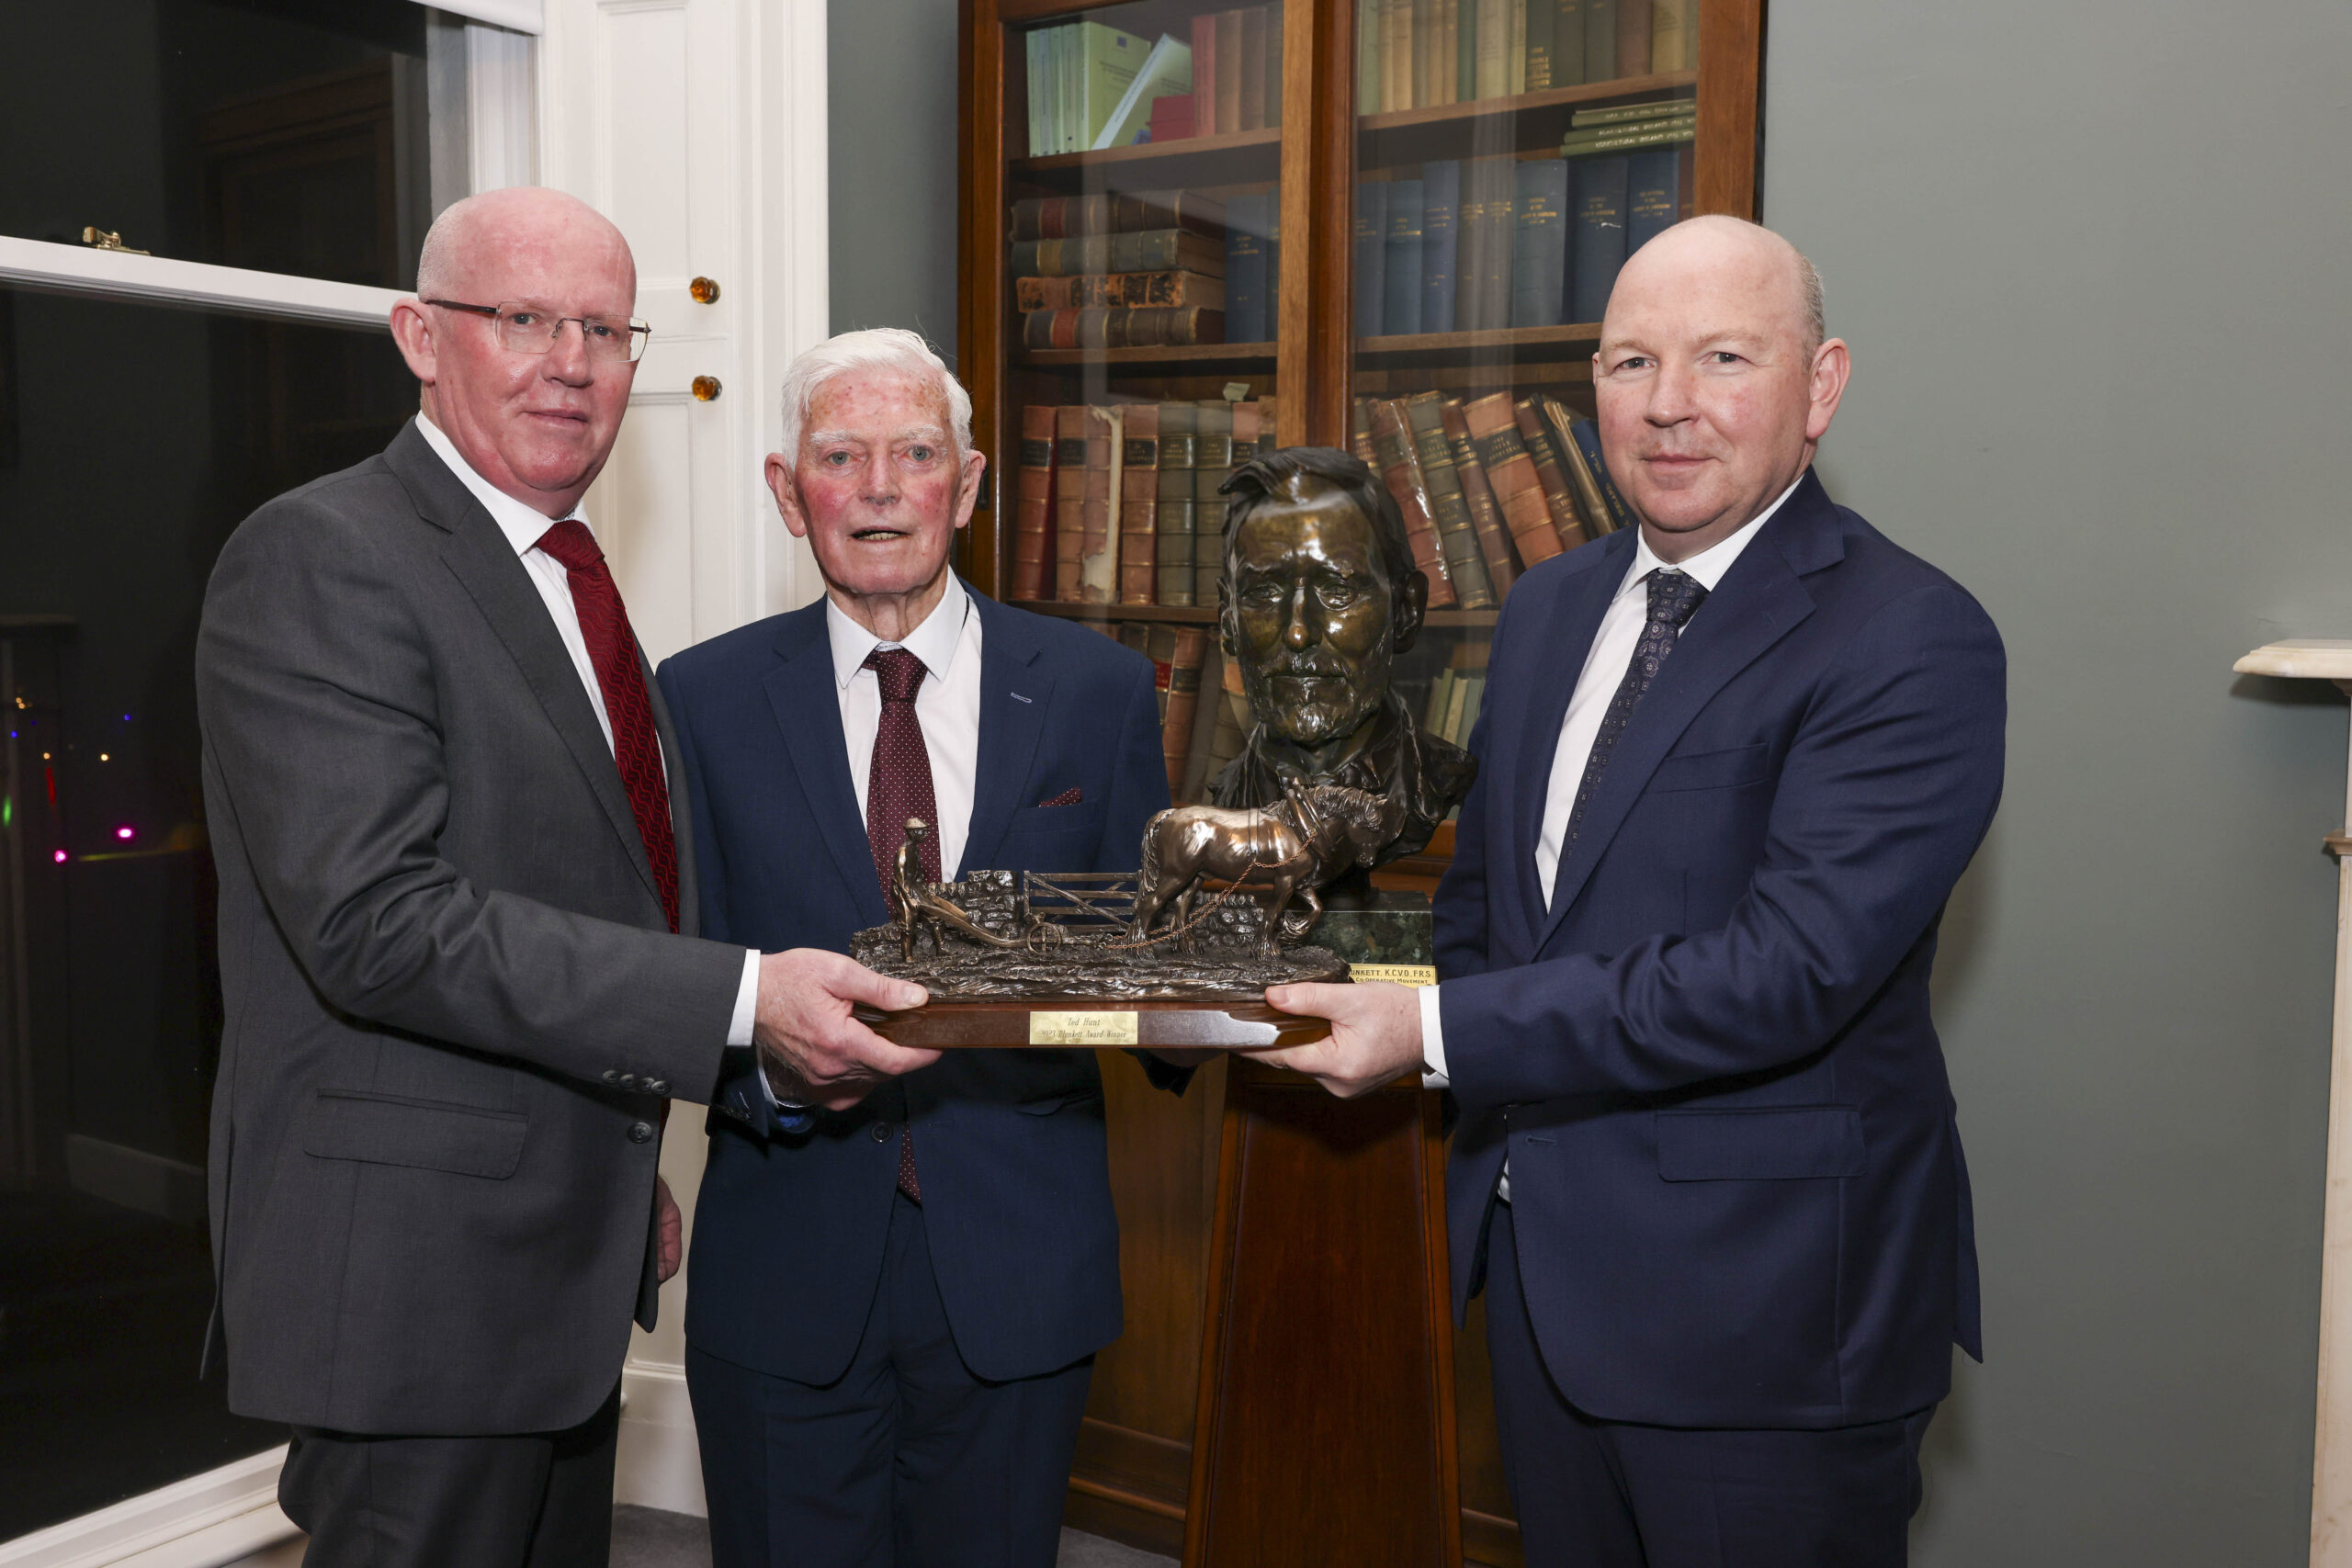 Ted Hunt (centre) with James O'Connor, Chairman (left) and Maurice Lyons, CEO, Golden Vale Marts Group.